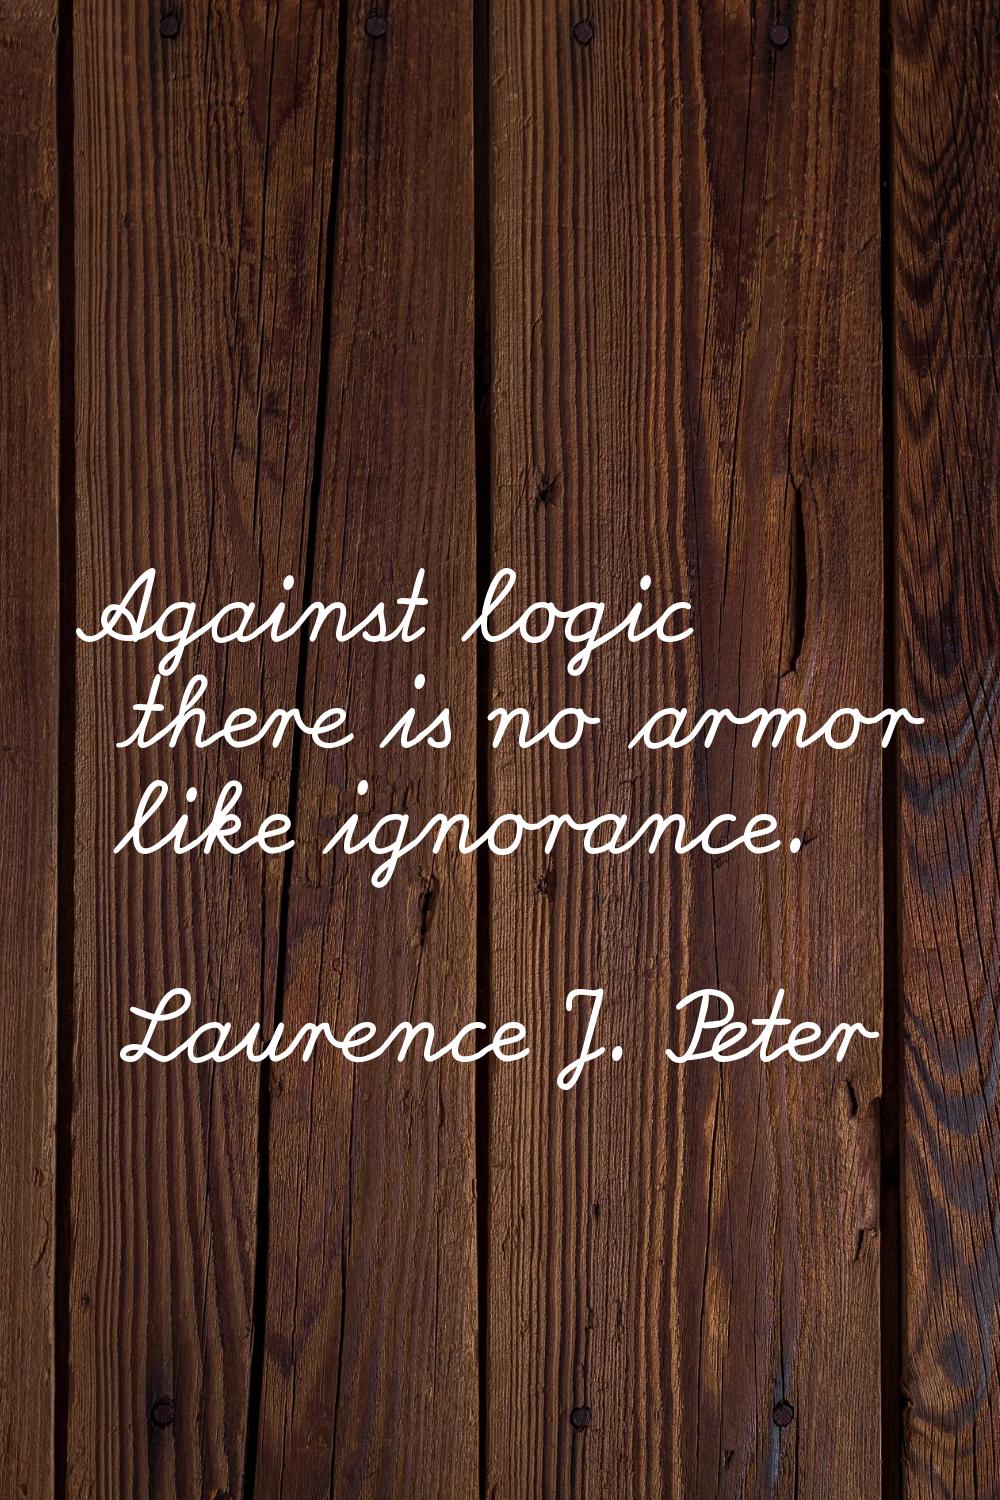 Against logic there is no armor like ignorance.